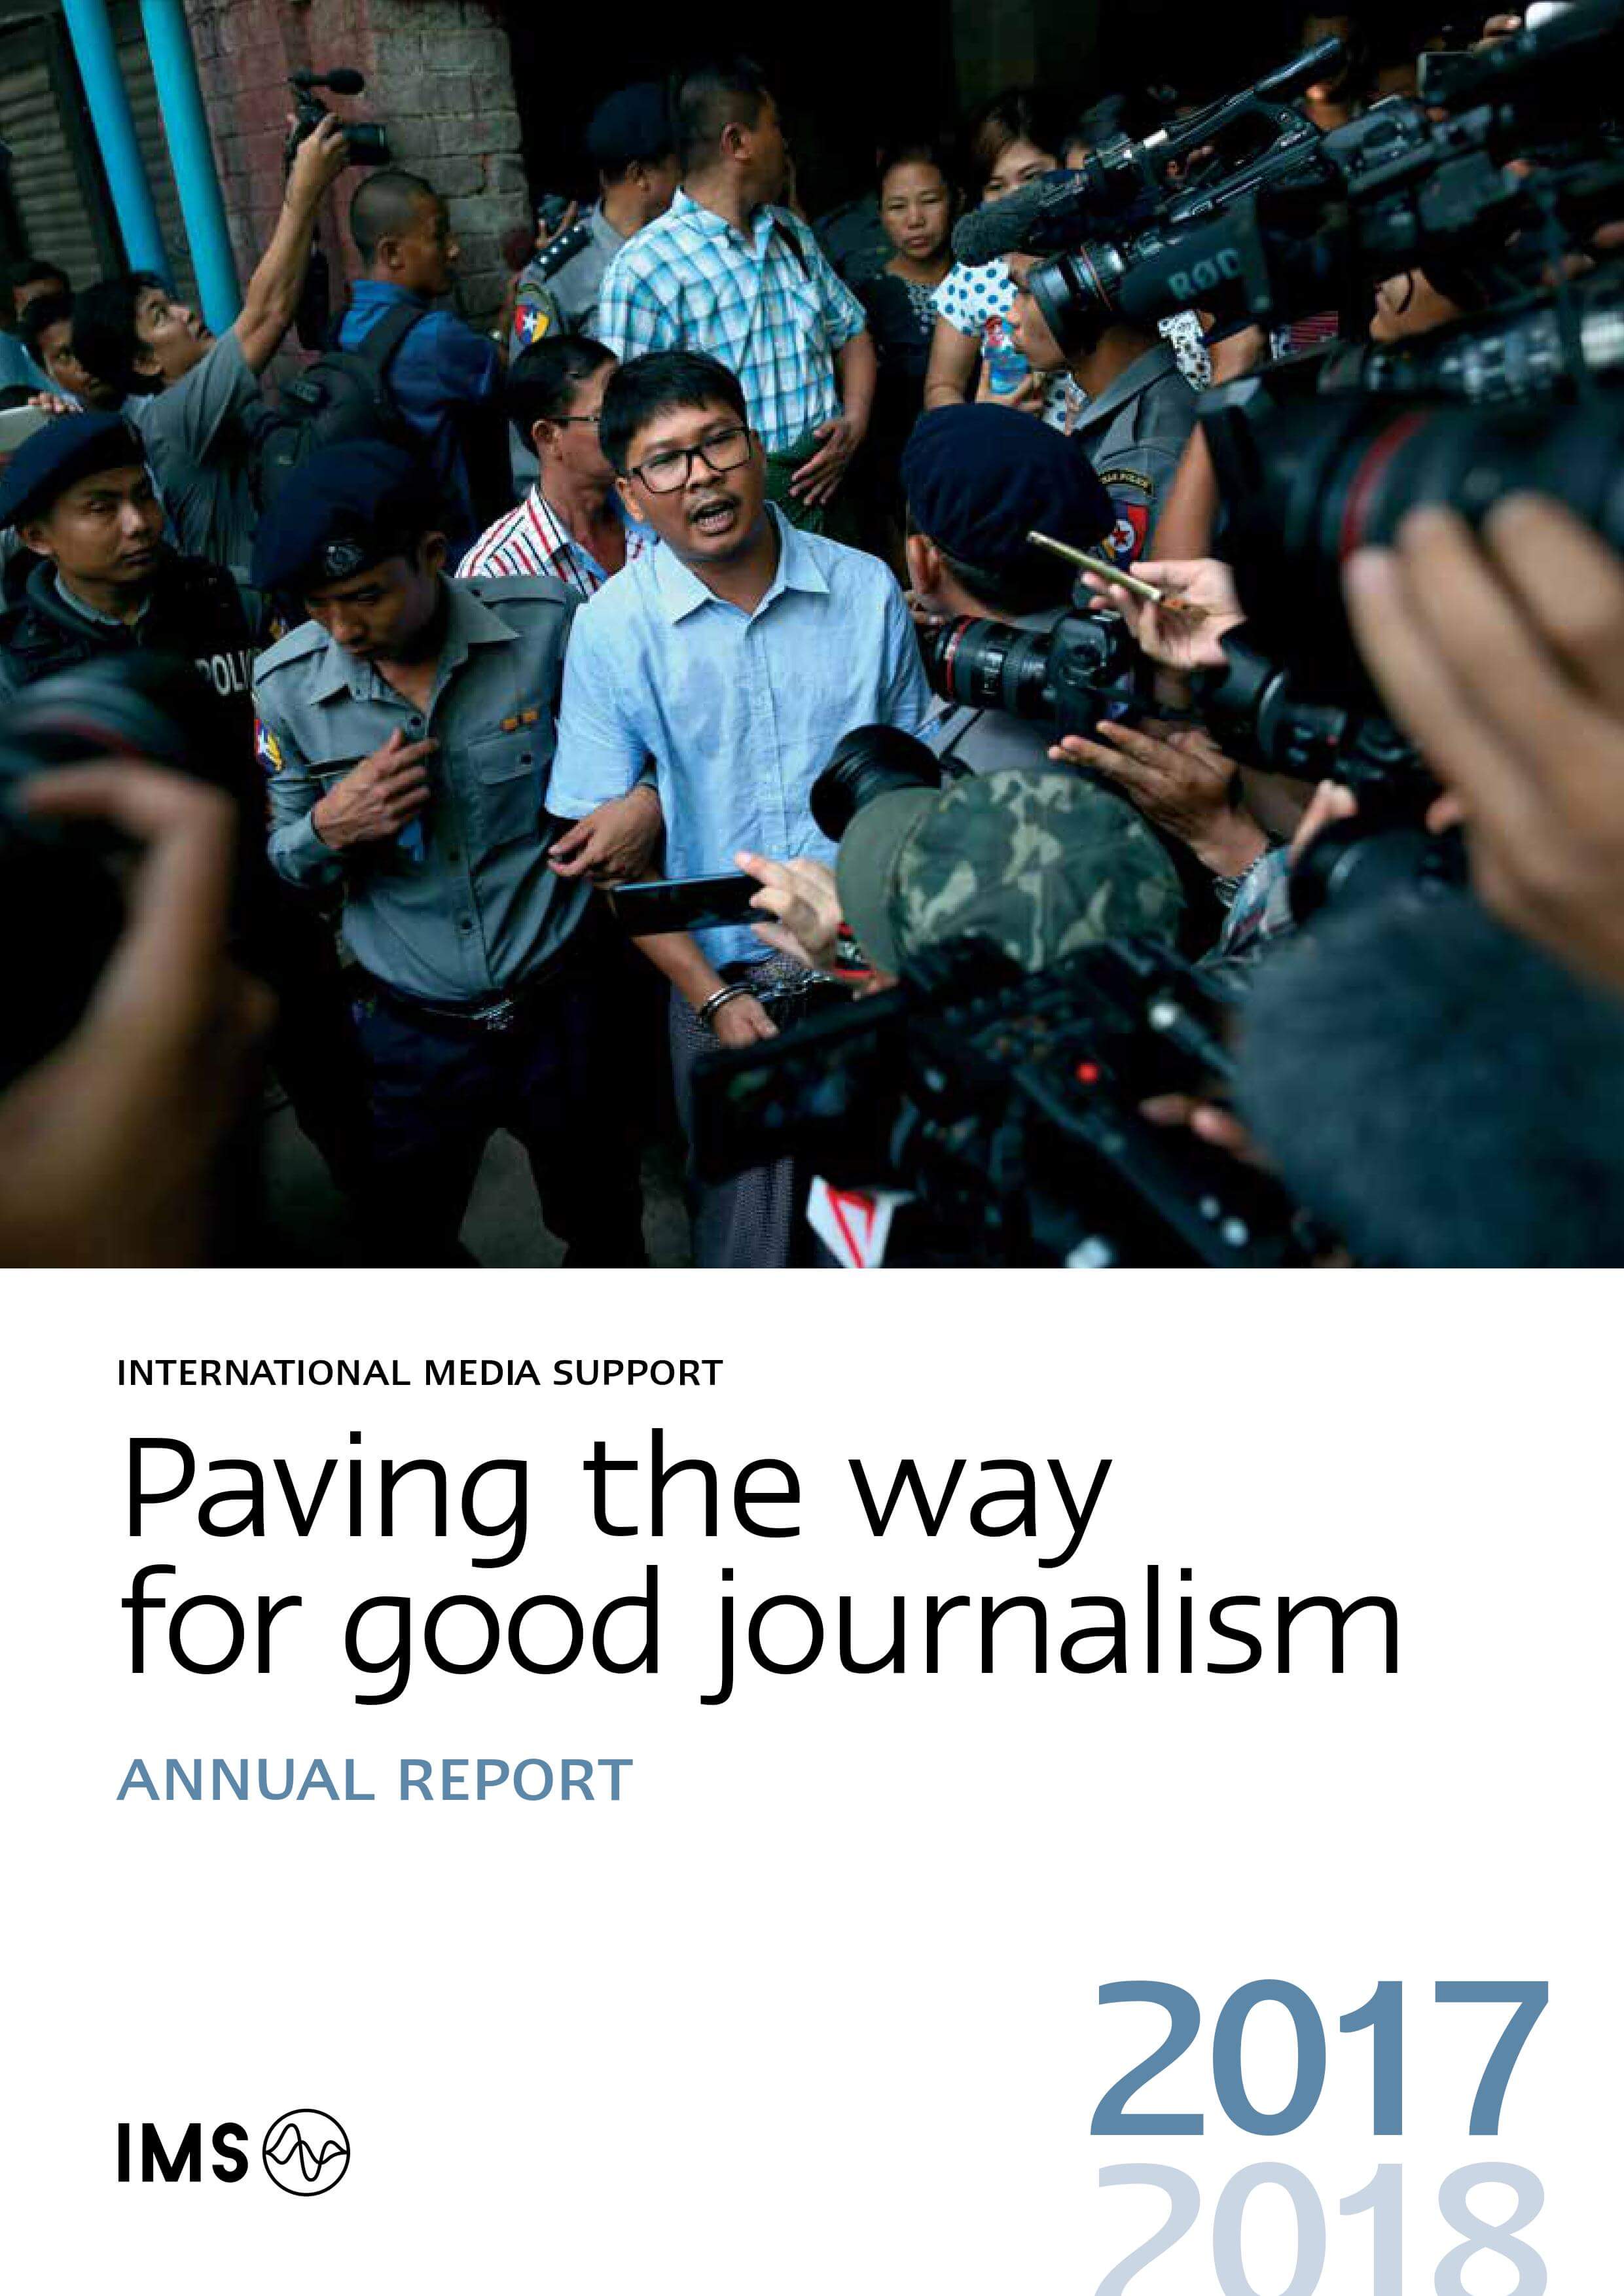 Paving the way for good journalism